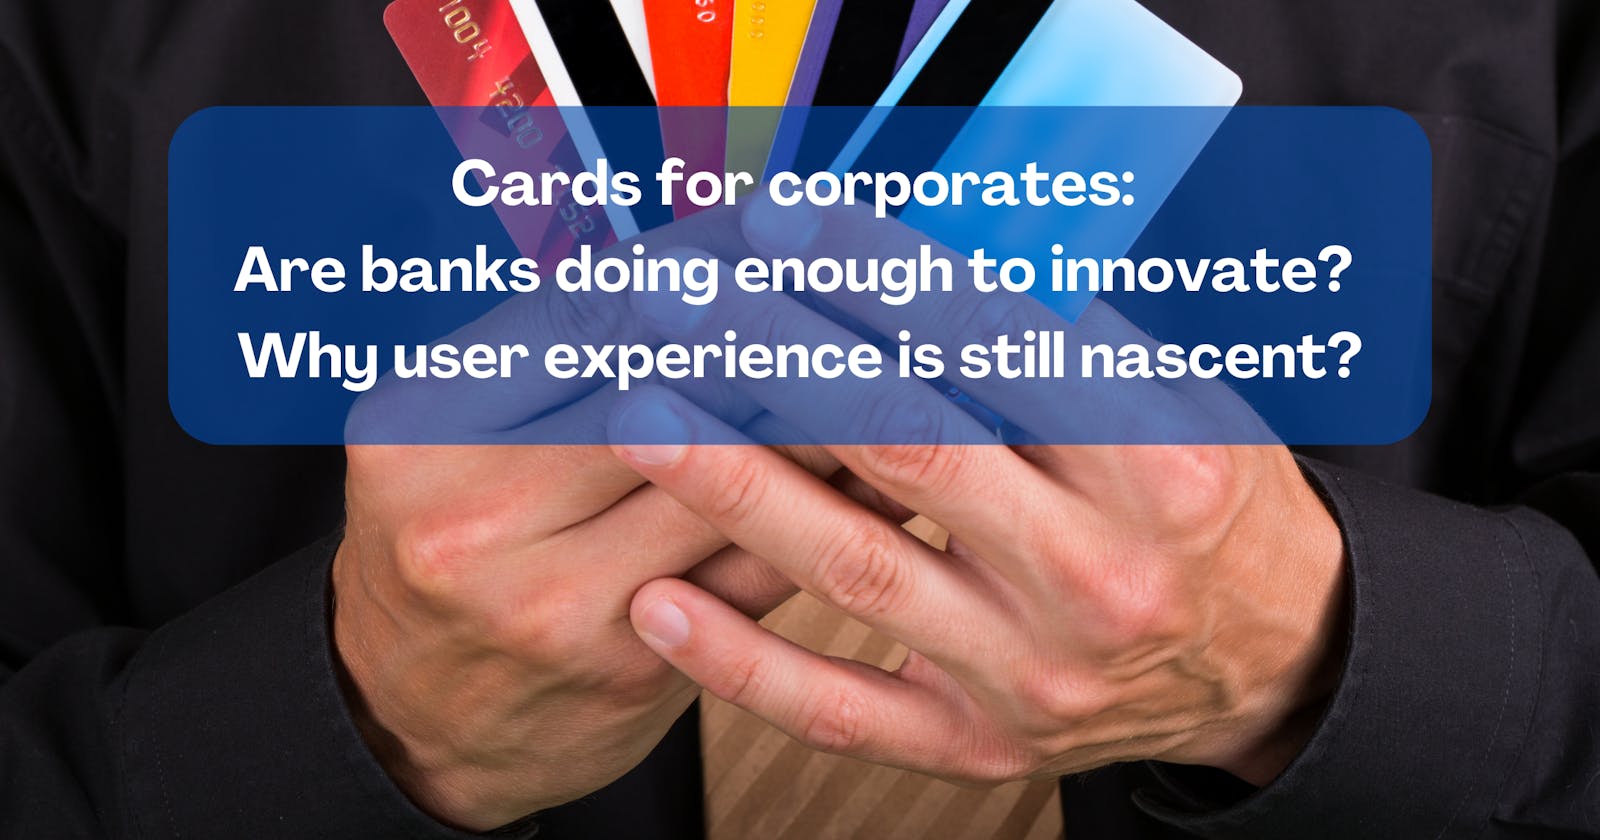 Cards for corporates: Are banks doing enough to innovate? Why user experience is still nascent?